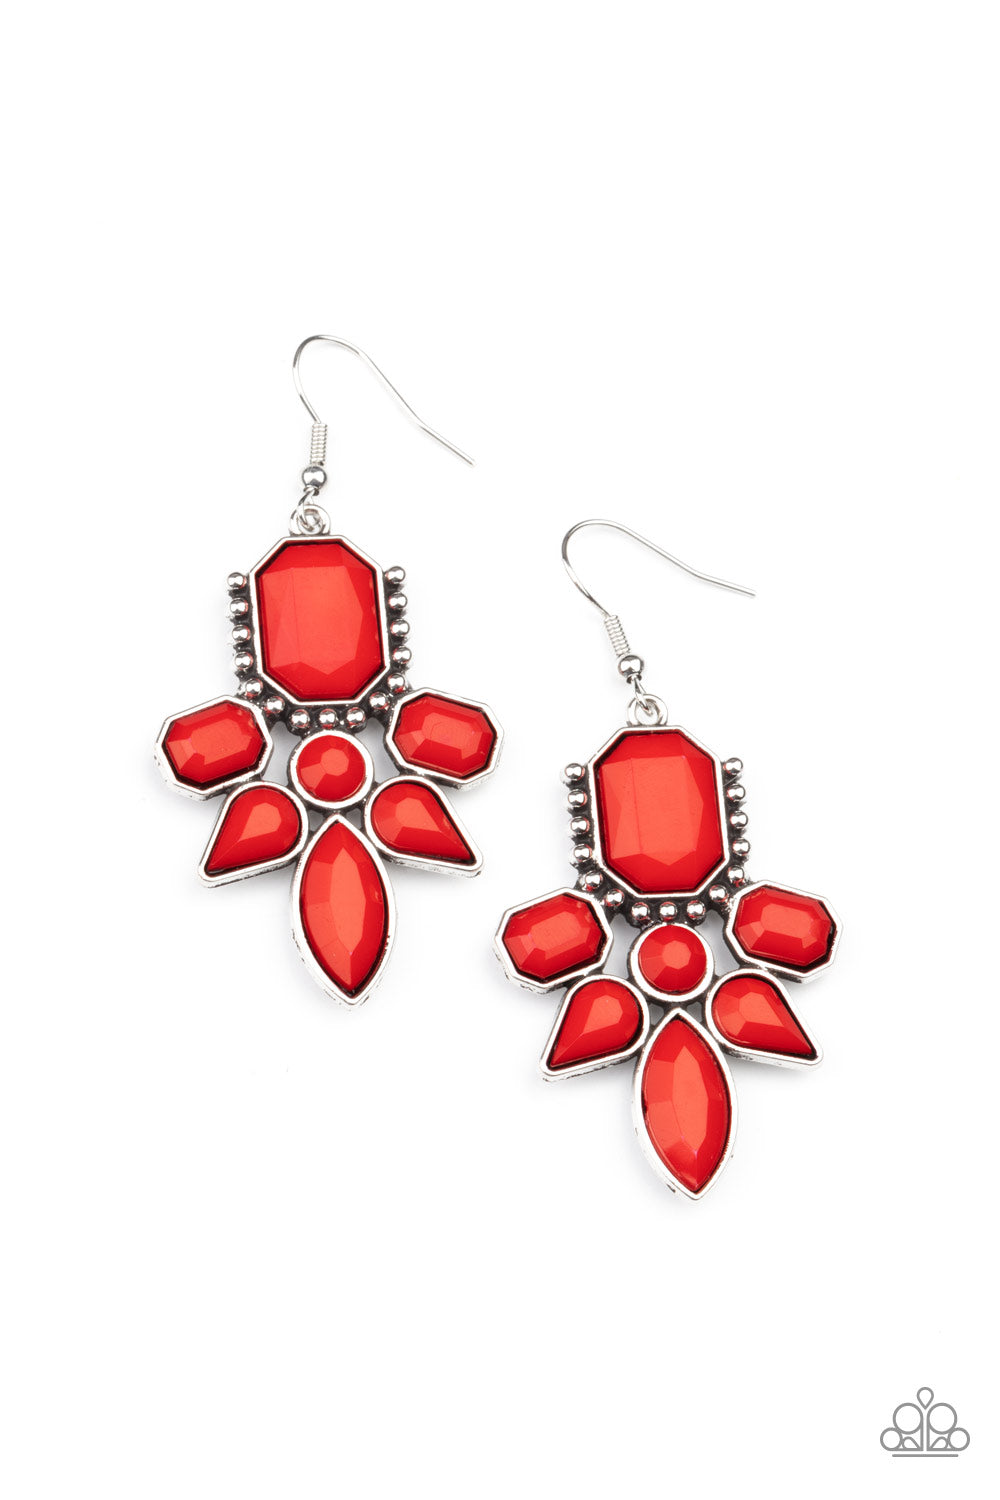 Featuring regal emerald, classic round, and tranquil teardrop shapes, a faceted collection of red beads coalesce into a vibrant frame. Earring attaches to a standard fishhook fitting.